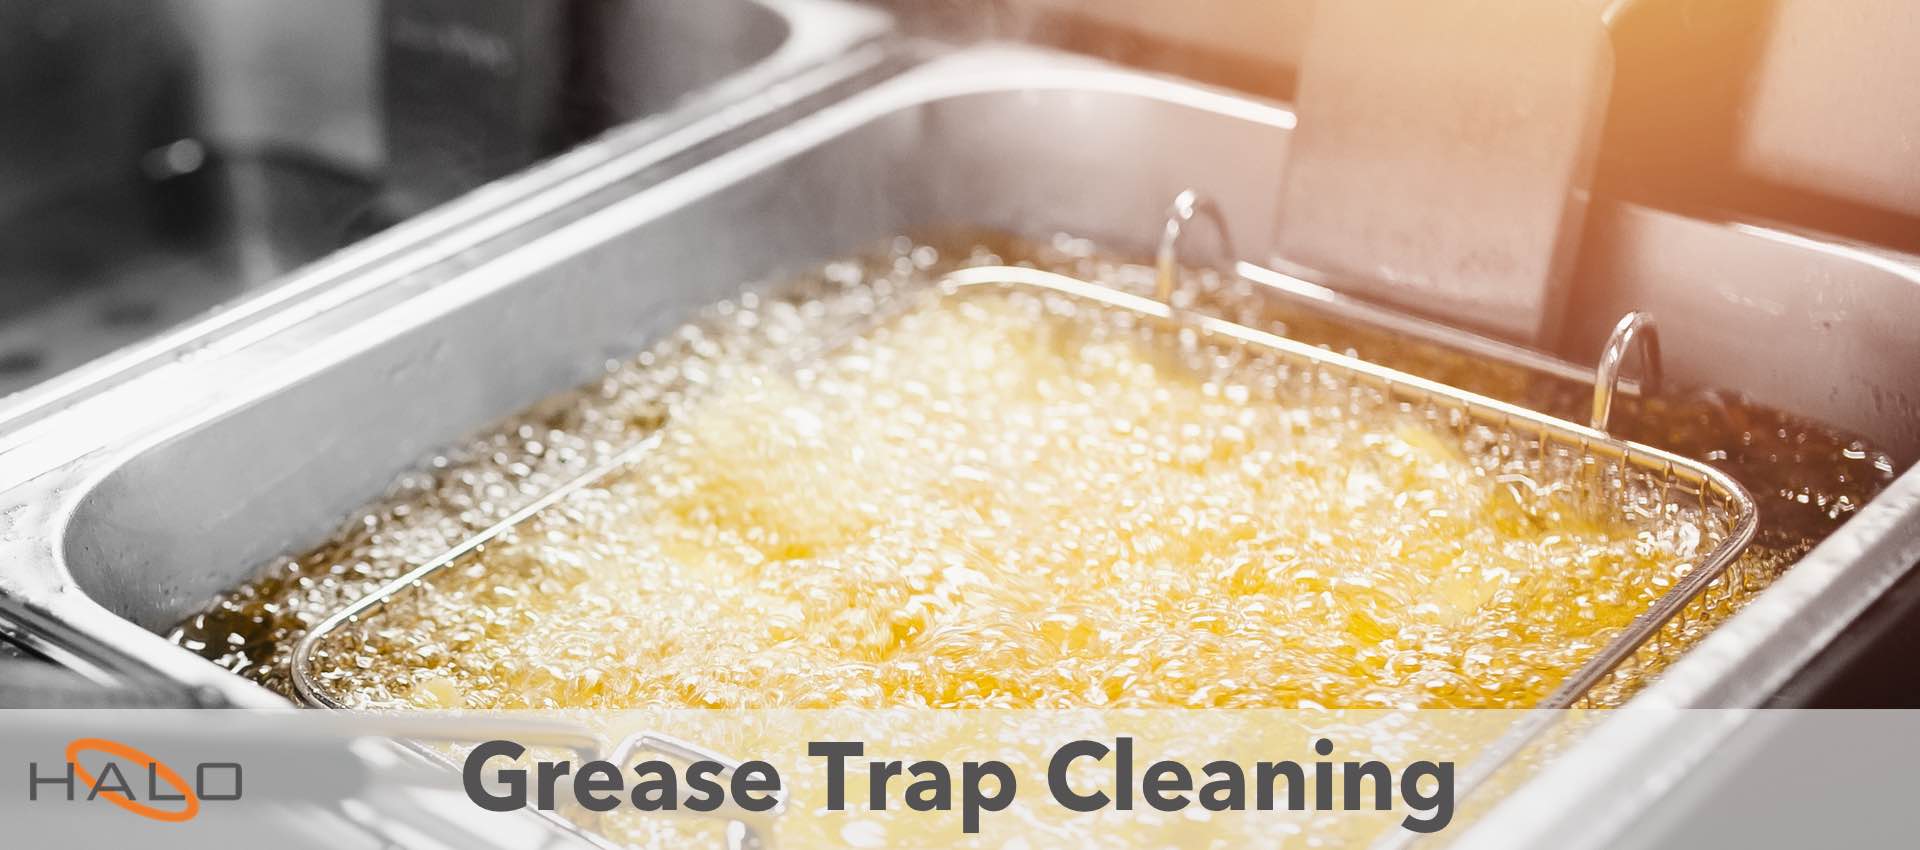 https://www.halorestorationservices.com/wp-content/uploads/2017/11/a-few-things-about-grease-traps-in-commercial-kitchens.jpg